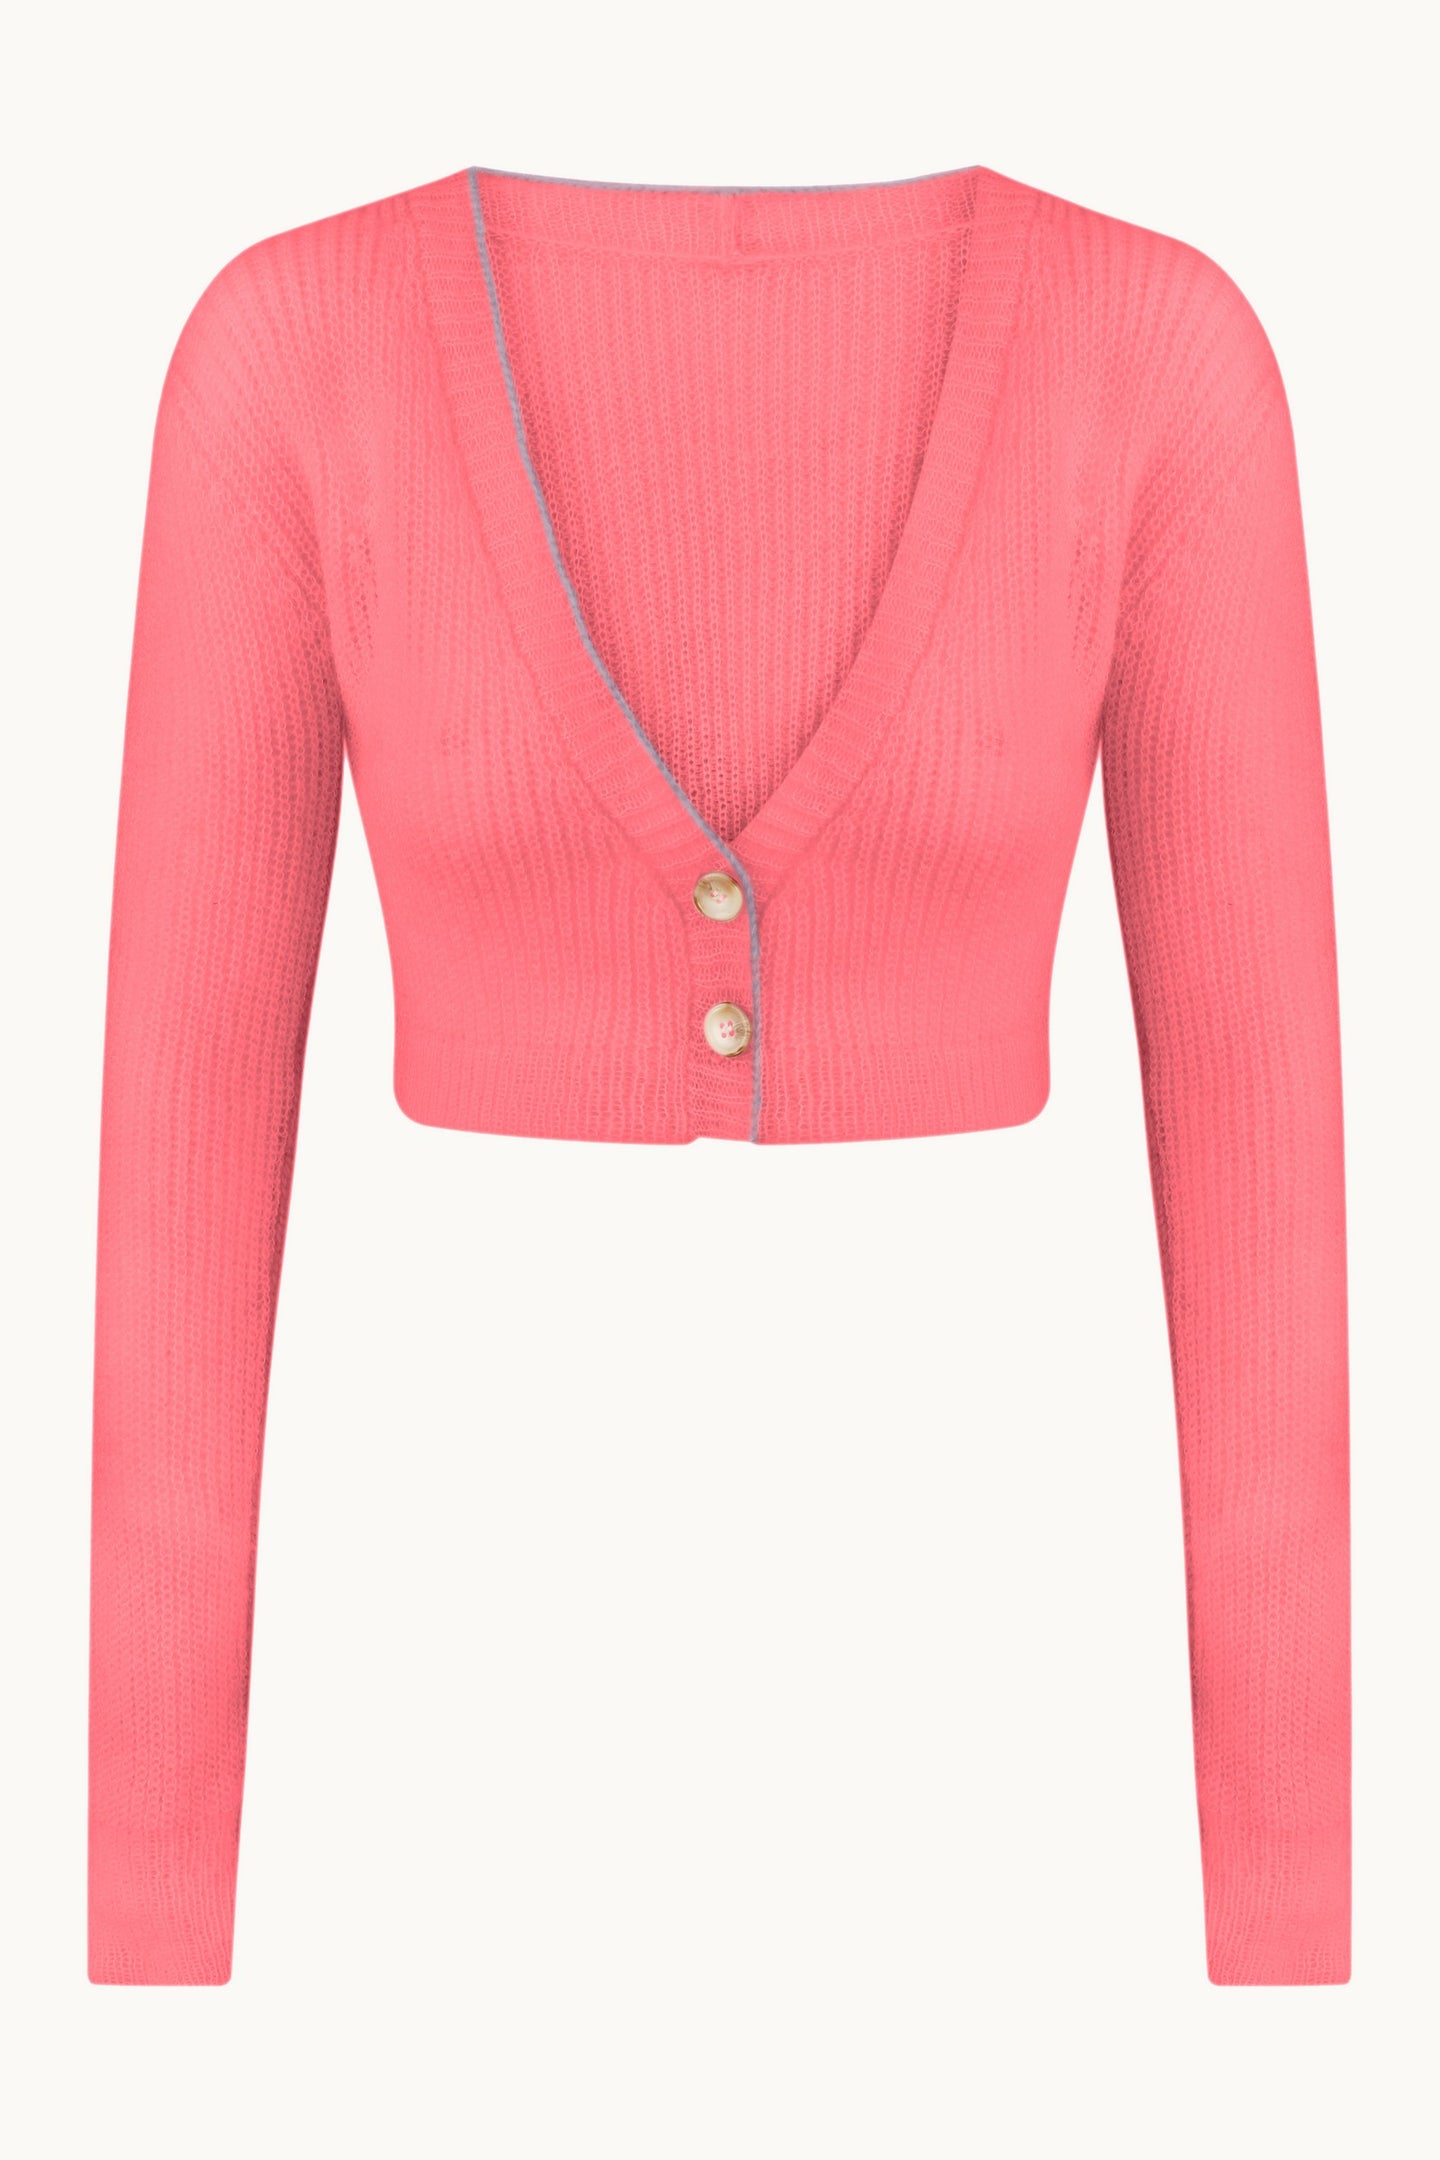 Lilou pink cardigan front view